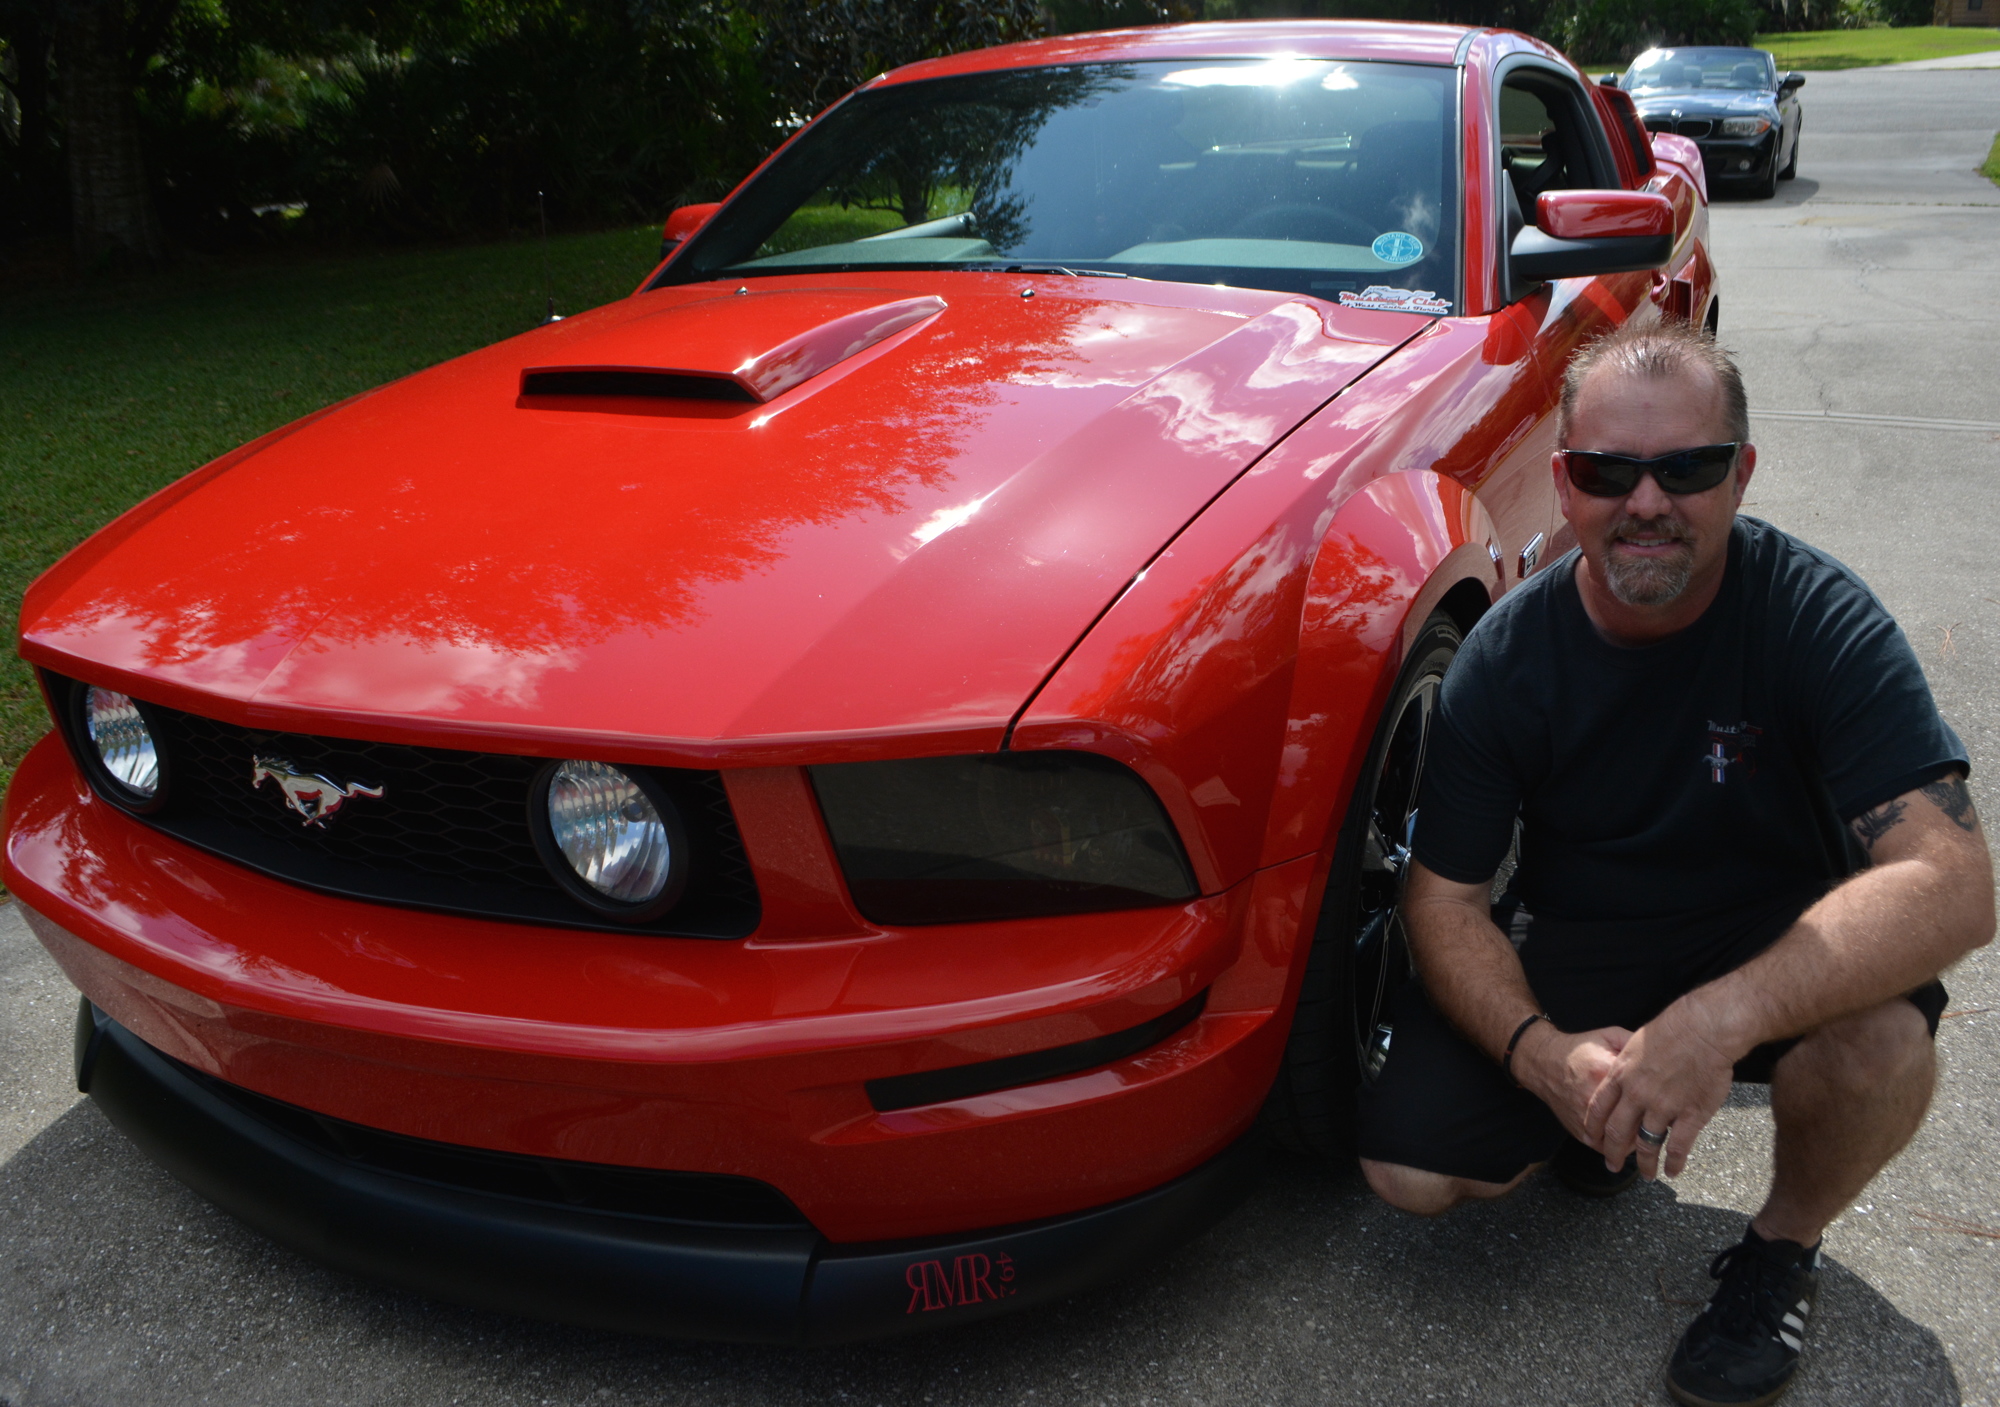 Lee Fitzstephens, the president of the Mustang Club of West Central Florida, said many cars in shows are judged on how they are detailed.